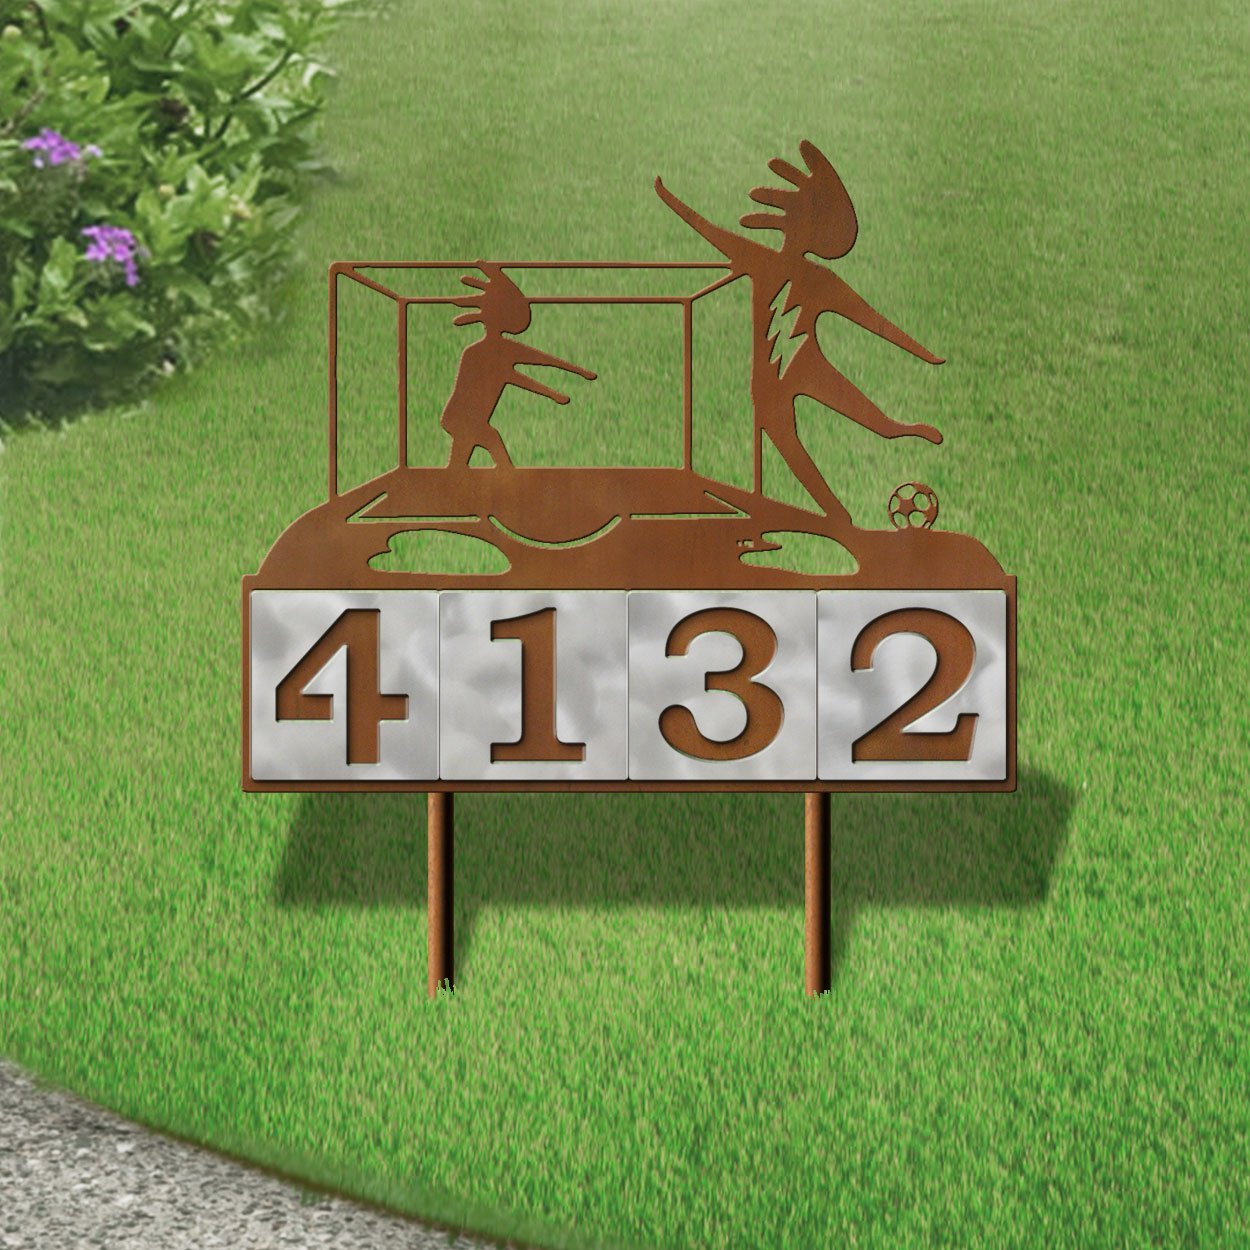 610194 - Kokopelli Soccer Player and Goalie Design 4-Digit Horizontal 6-inch Tile Outdoor House Numbers Yard Sign